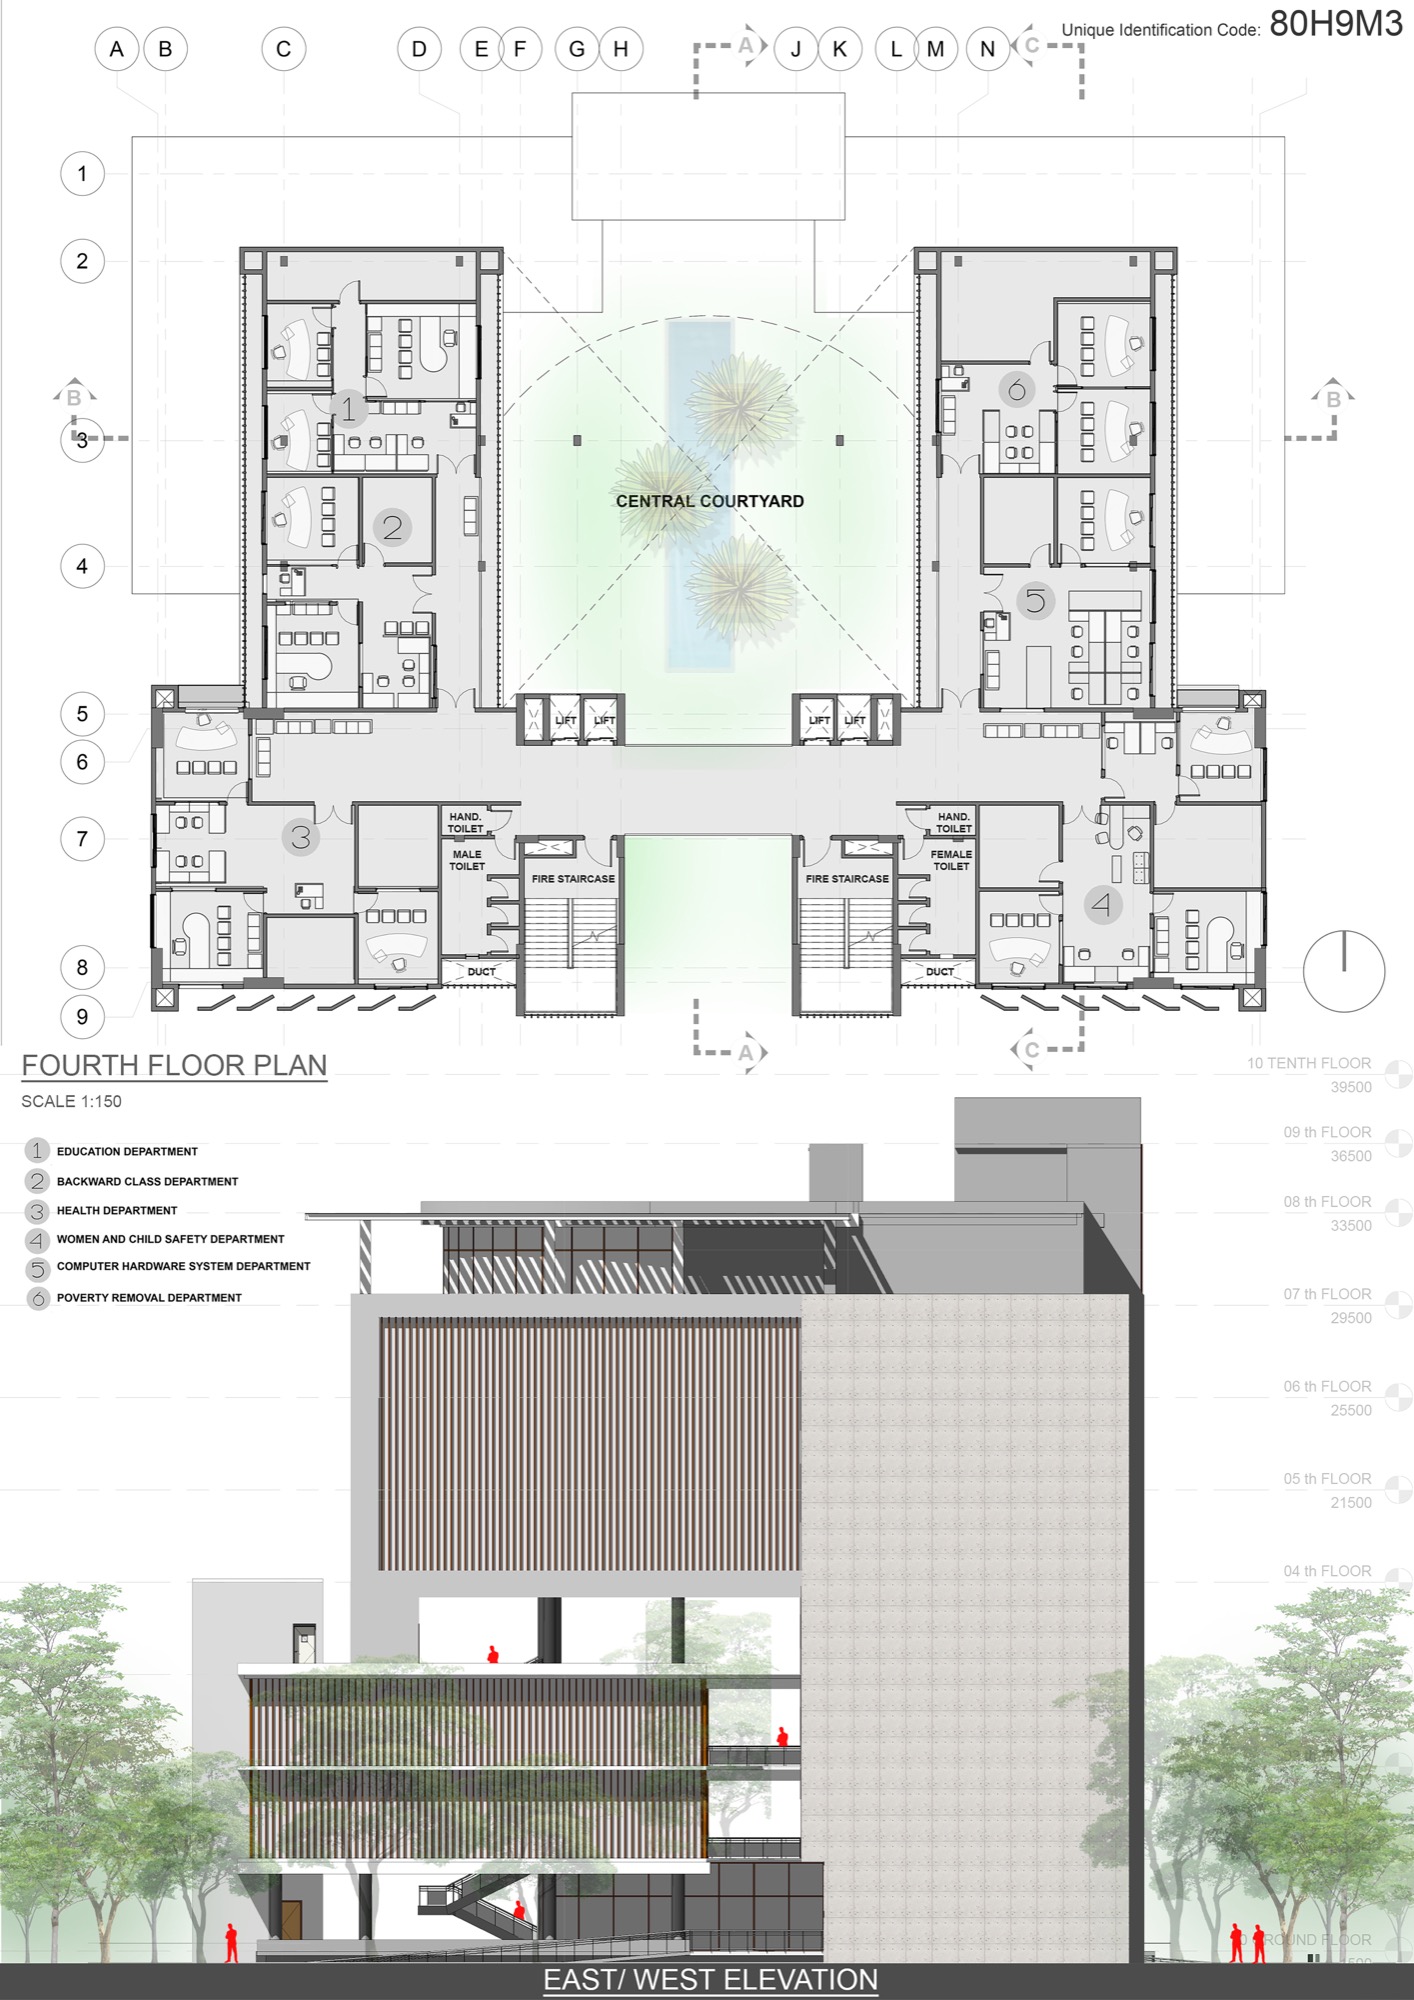 Satara Municipal Corporation, Shortlisted competition entry by Studio UD+AC 18